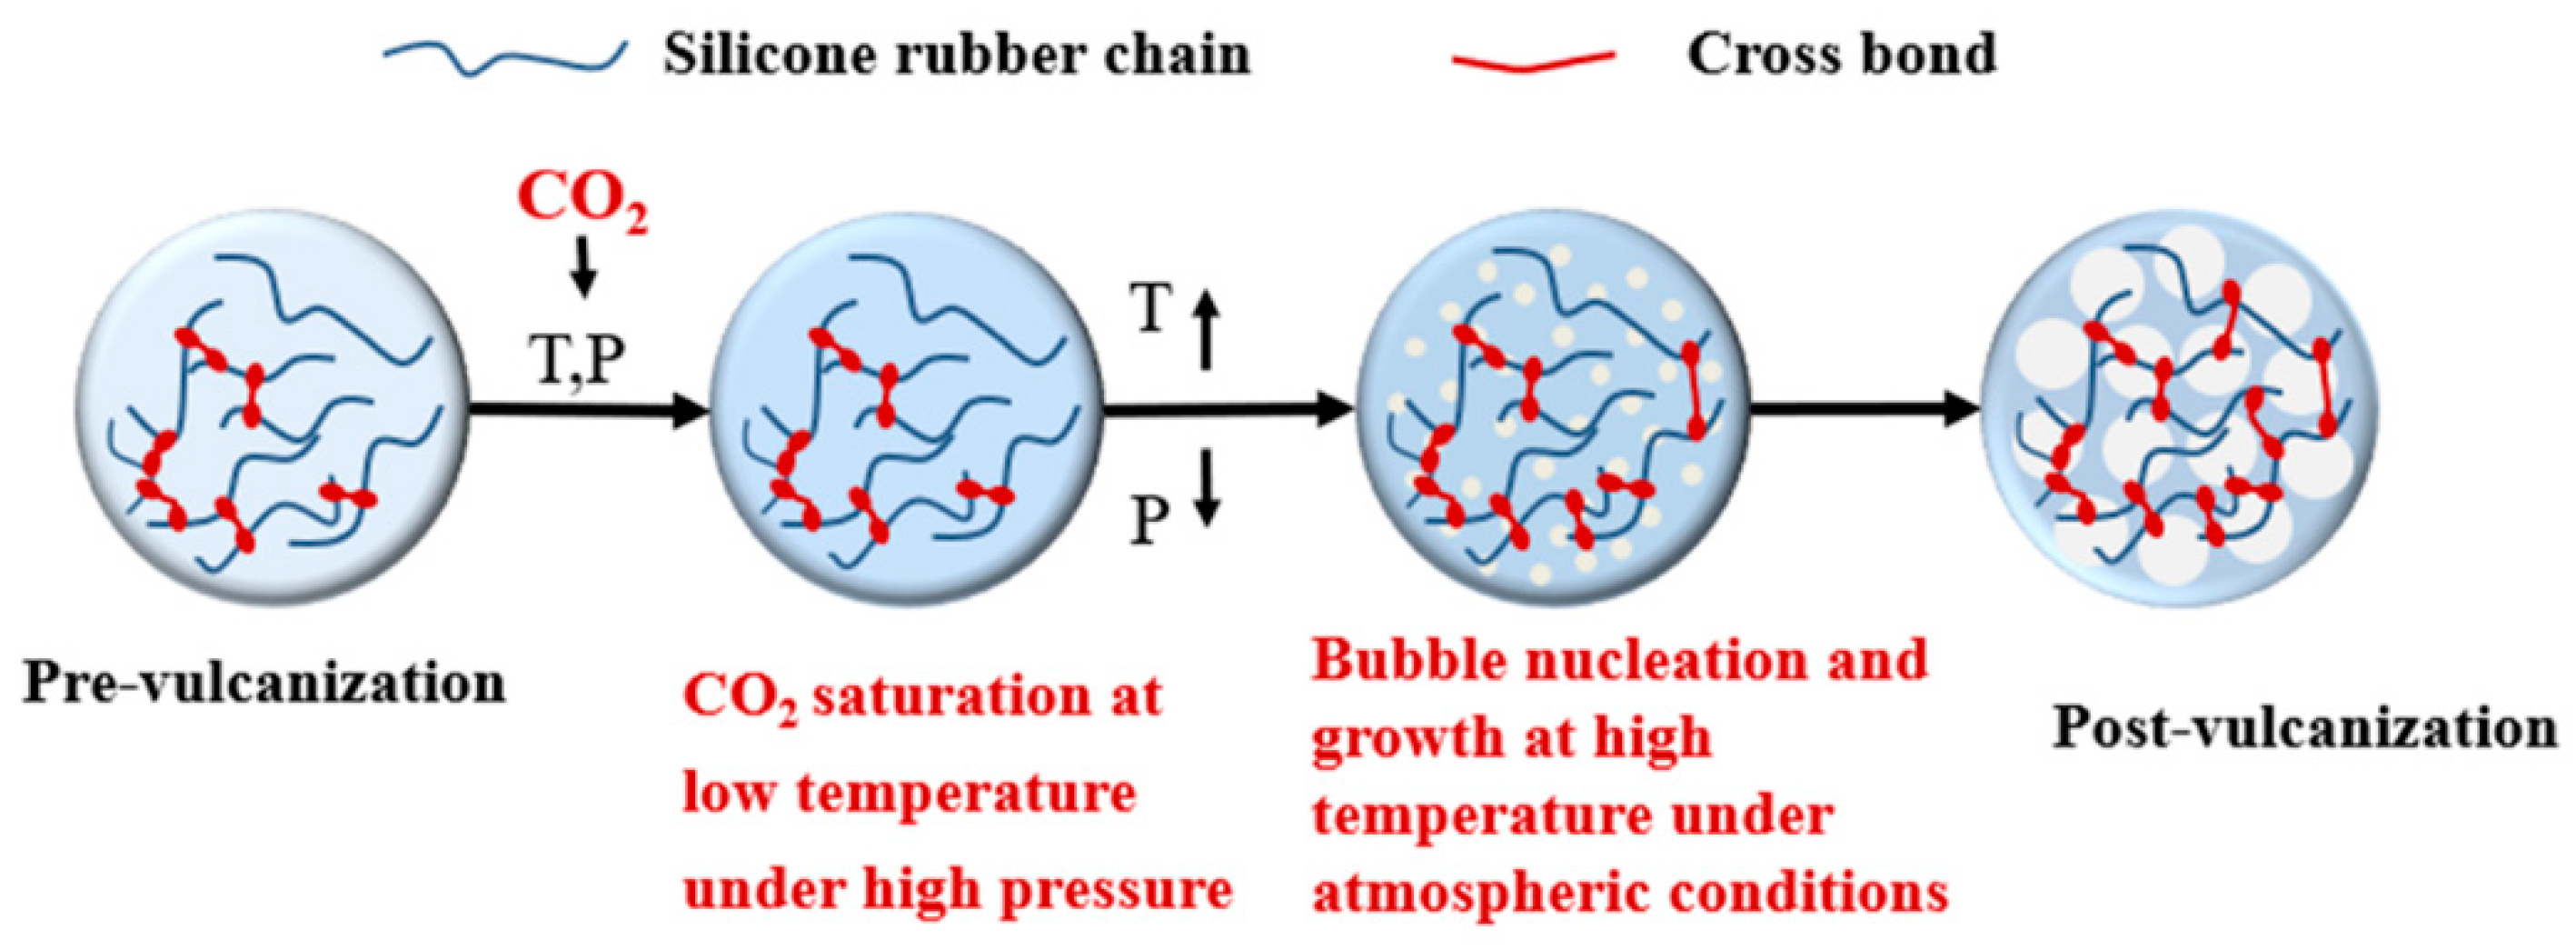 Polymers | Free Full-Text | Effect of Vulcanization and CO2 Plasticization  on Cell Morphology of Silicone Rubber in Temperature Rise Foaming Process